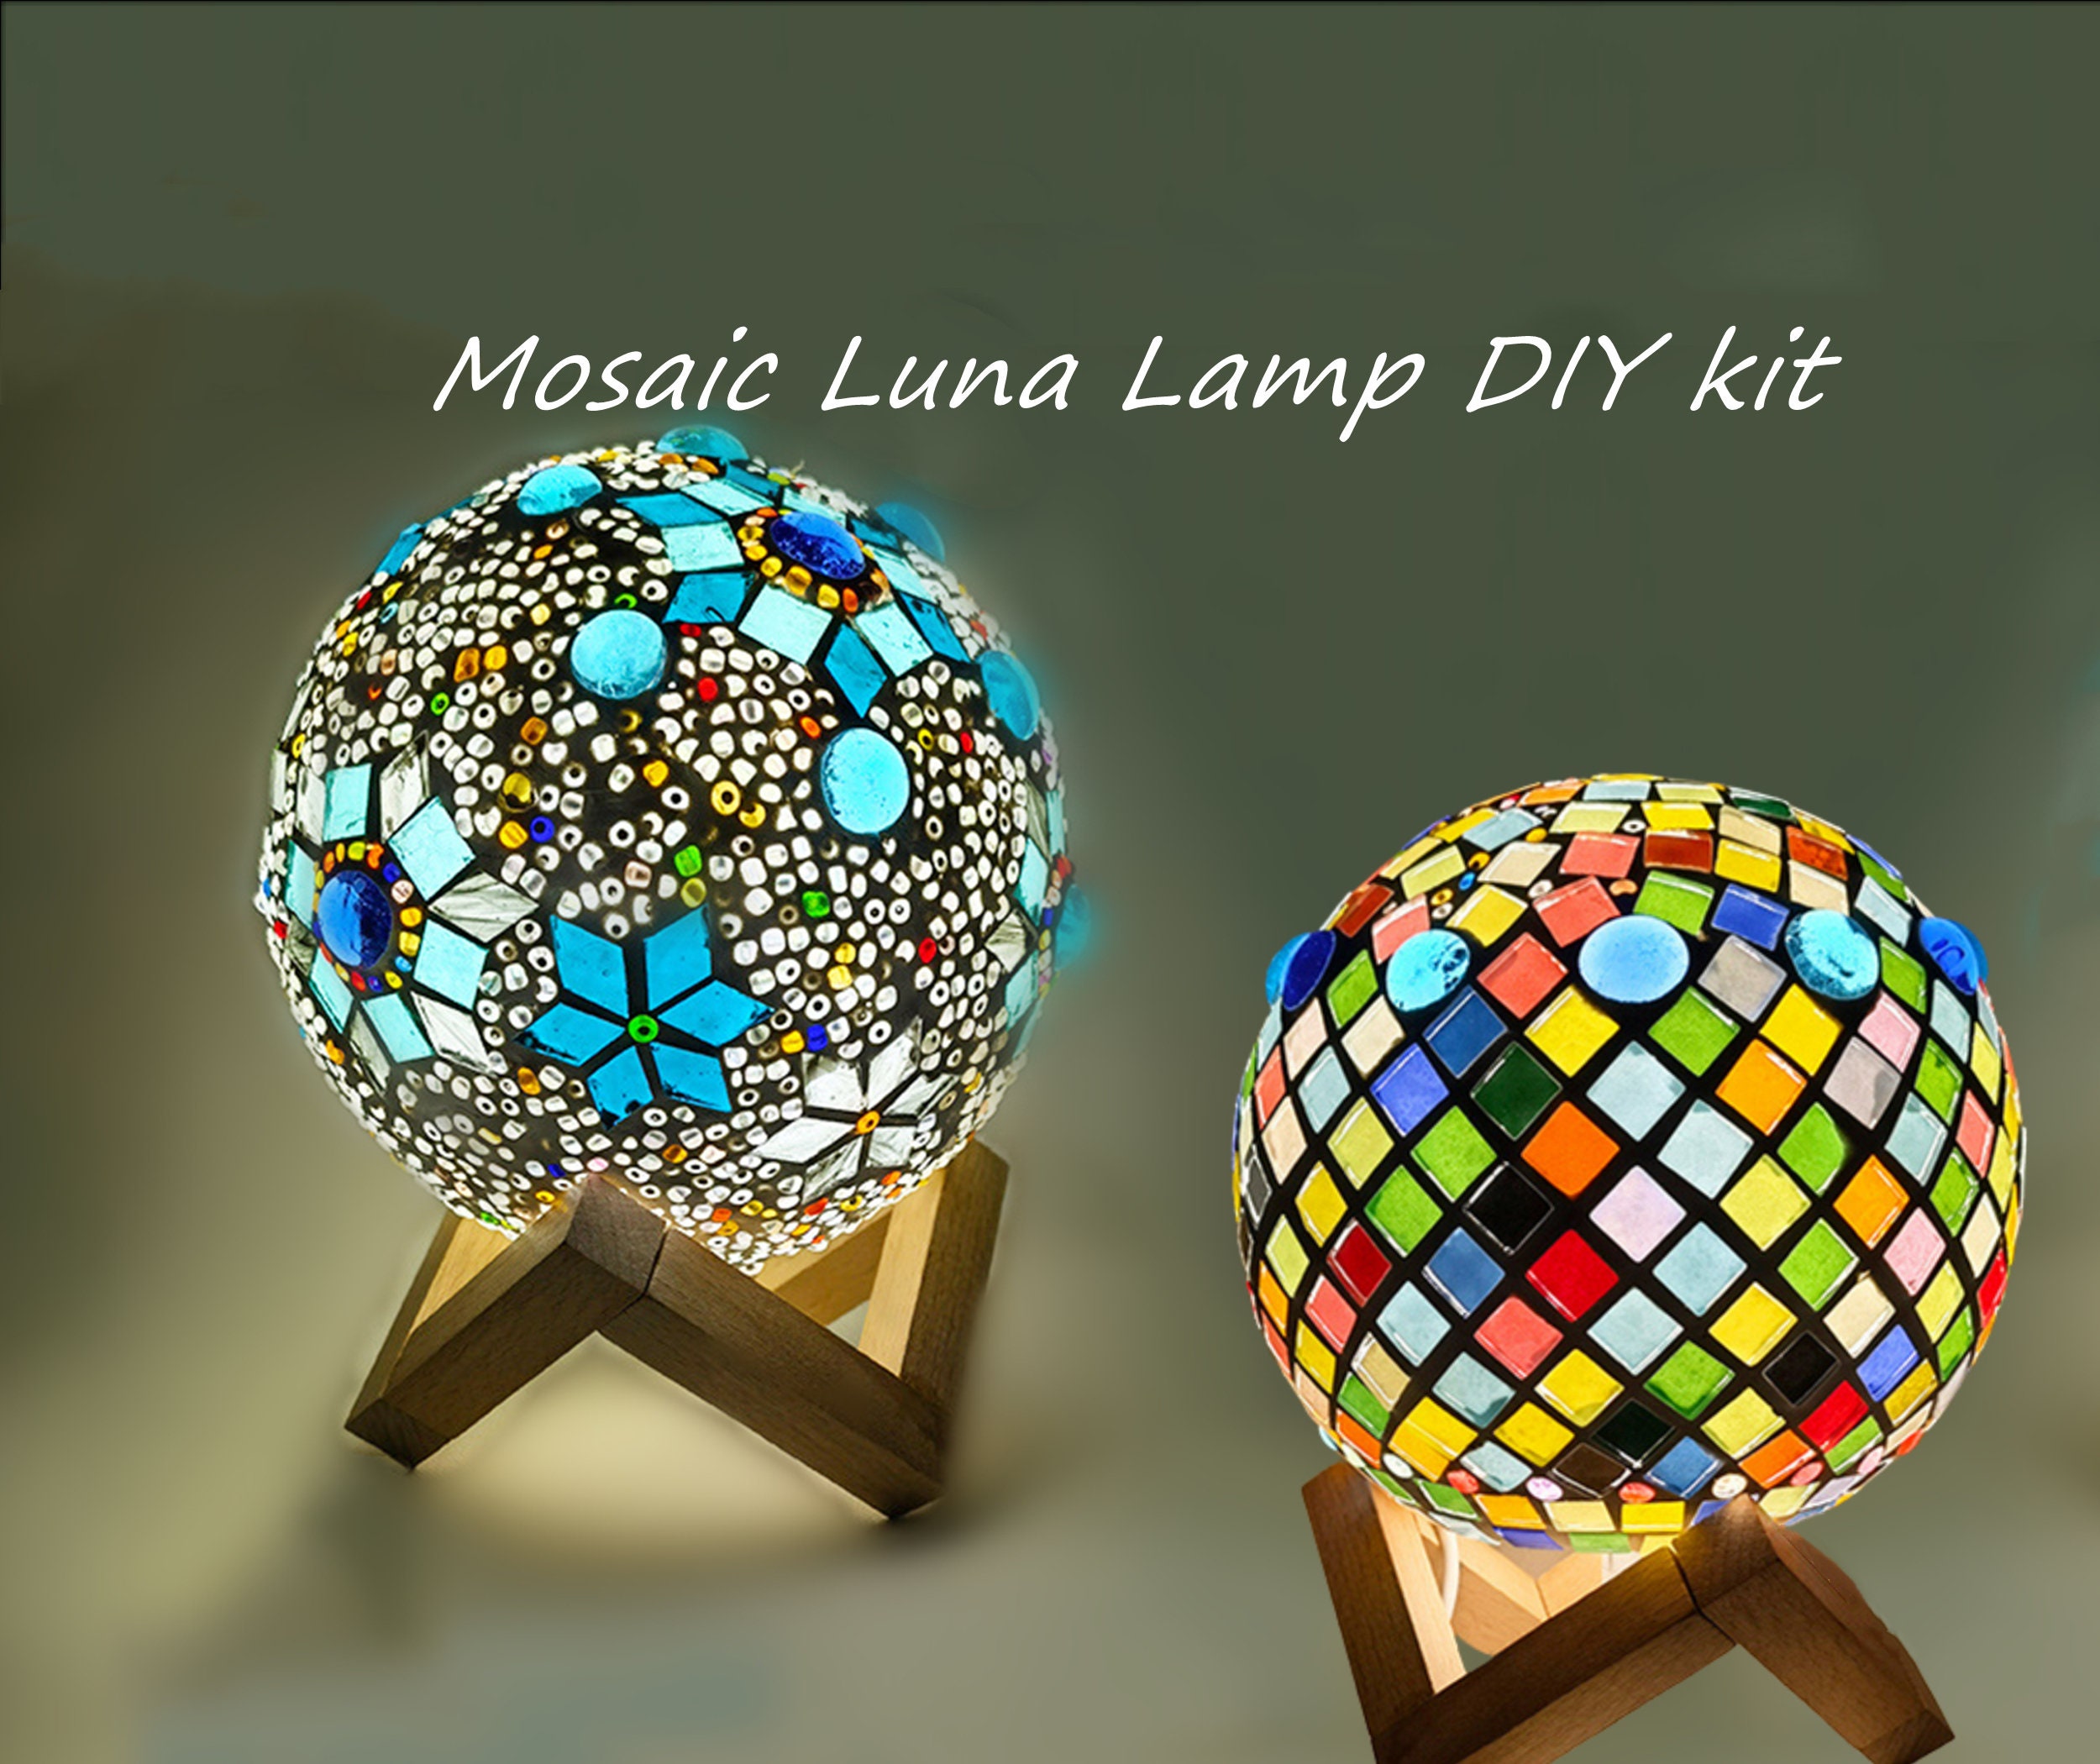 Kids Nightlamp DIY Kit- Creative Arts and Crafts for Girls and Boys Ages 5 Years and Up- Stained Glass Lamp with Window Paint and Circuit - Best